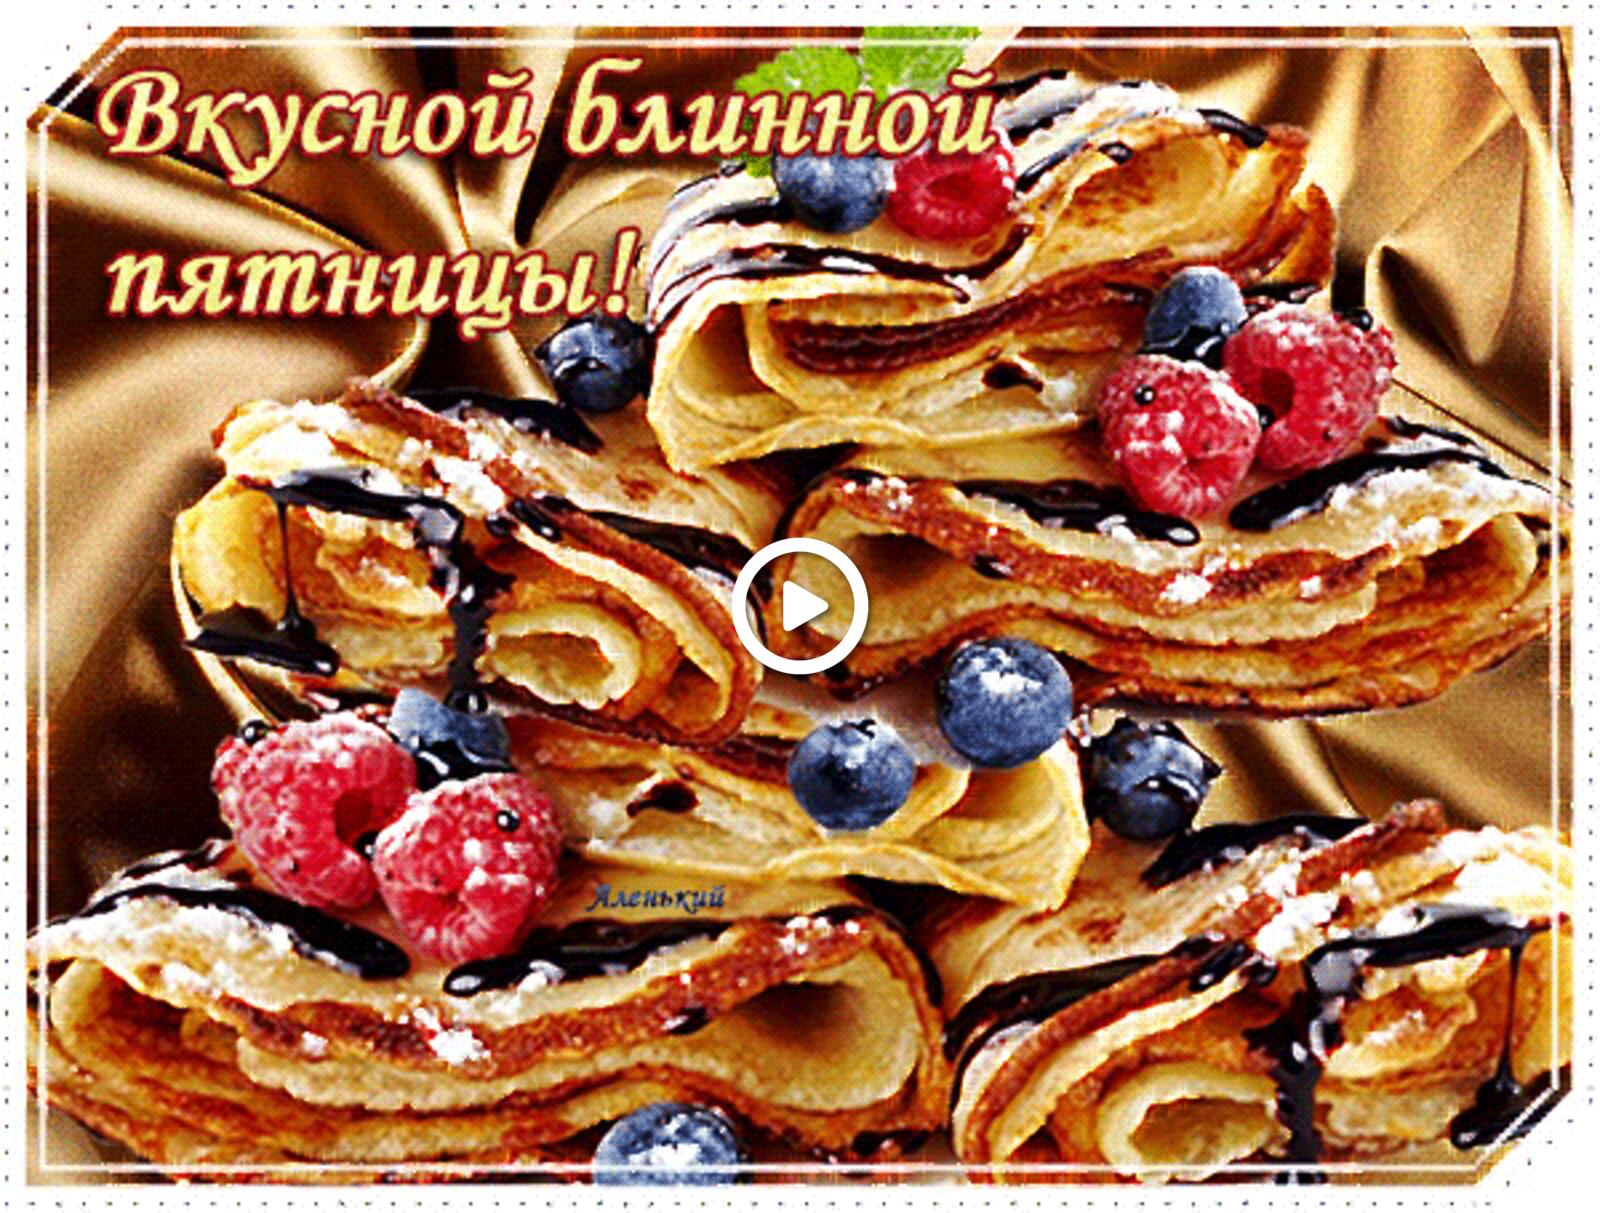 A postcard on the subject of pancakes happy shrovetide 2019 shrovetide card for free